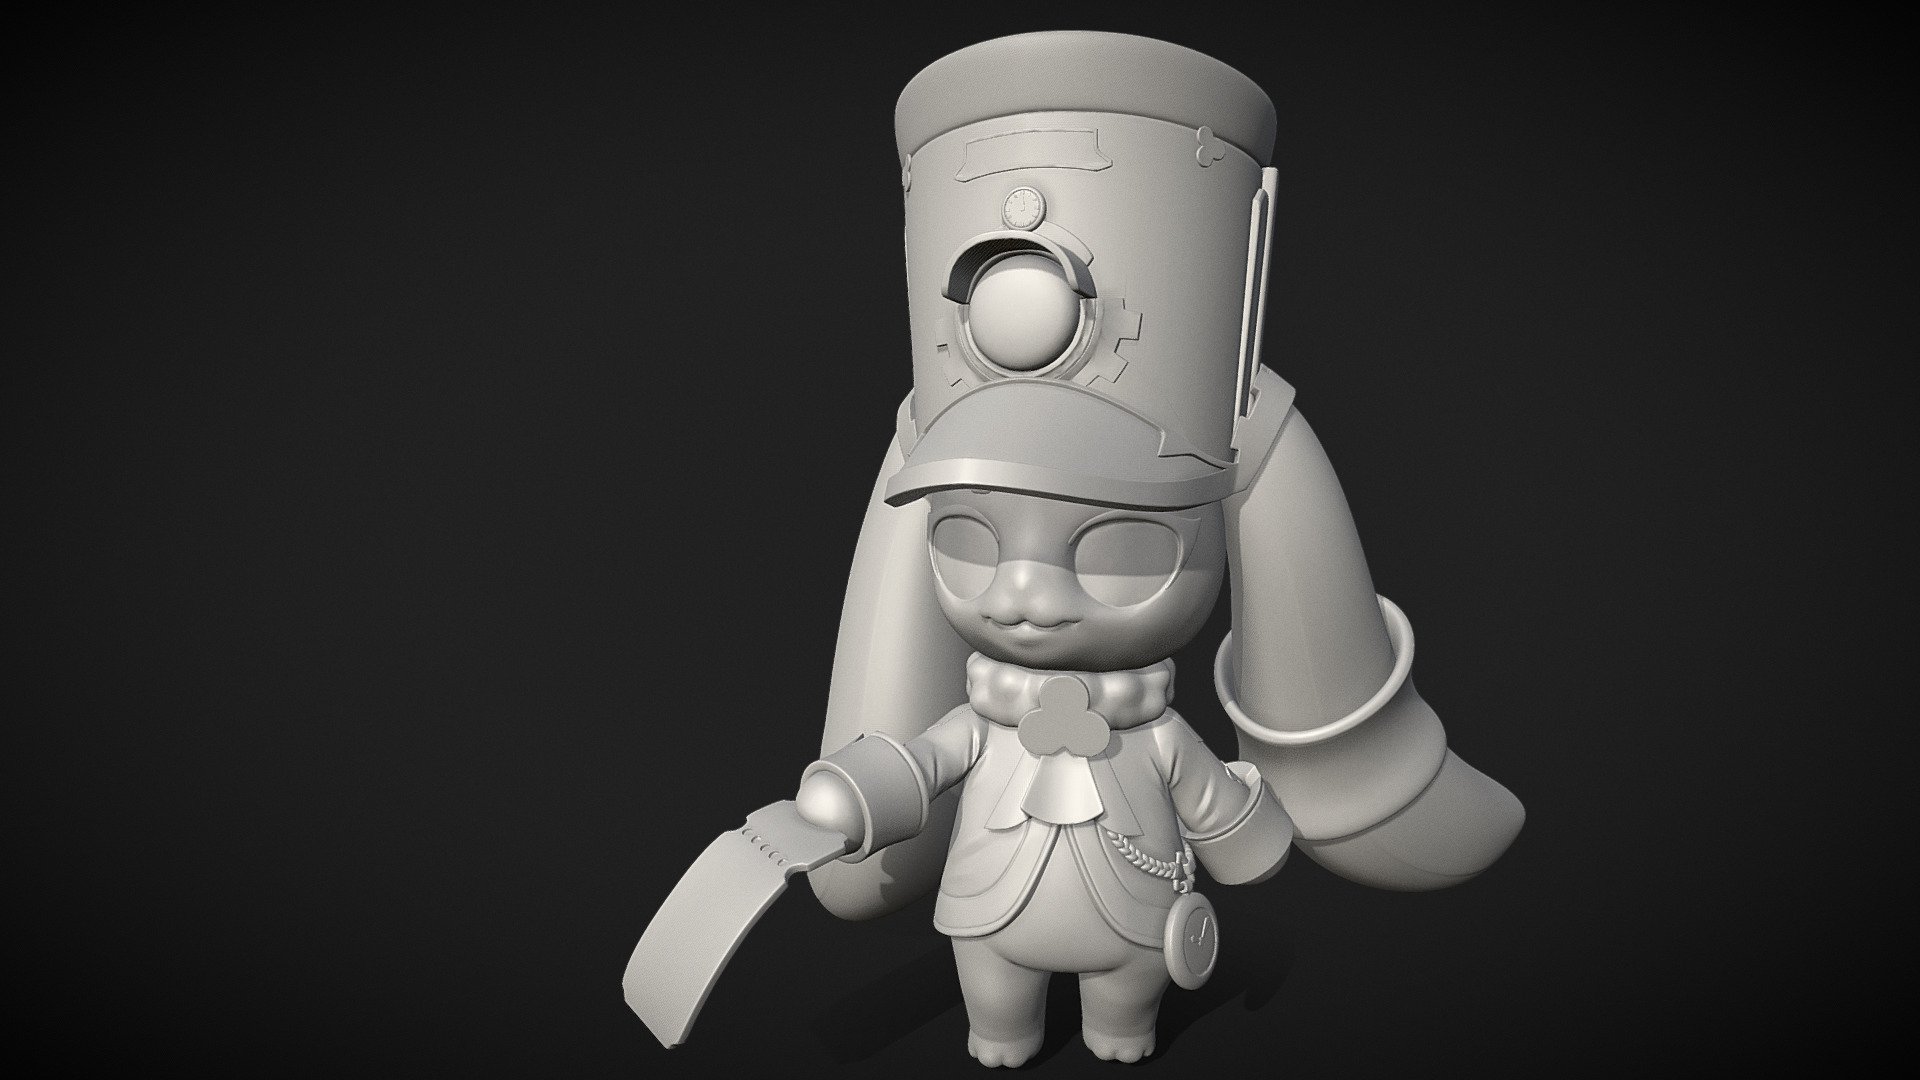 Hey! Passenger! You forgot your ticket!
Pom-Pom from Honkai StarRail fanart figurine.

3D printable version free download: https://www.myminifactory.com/object/3d-print-pom-pom-296200

If you want more free staff from me you can support me here: https://www.patreon.com/lpbunny

Or take commission from me :3 - Pom-Pom - 3D model by Andrewlxlxl99 3d model